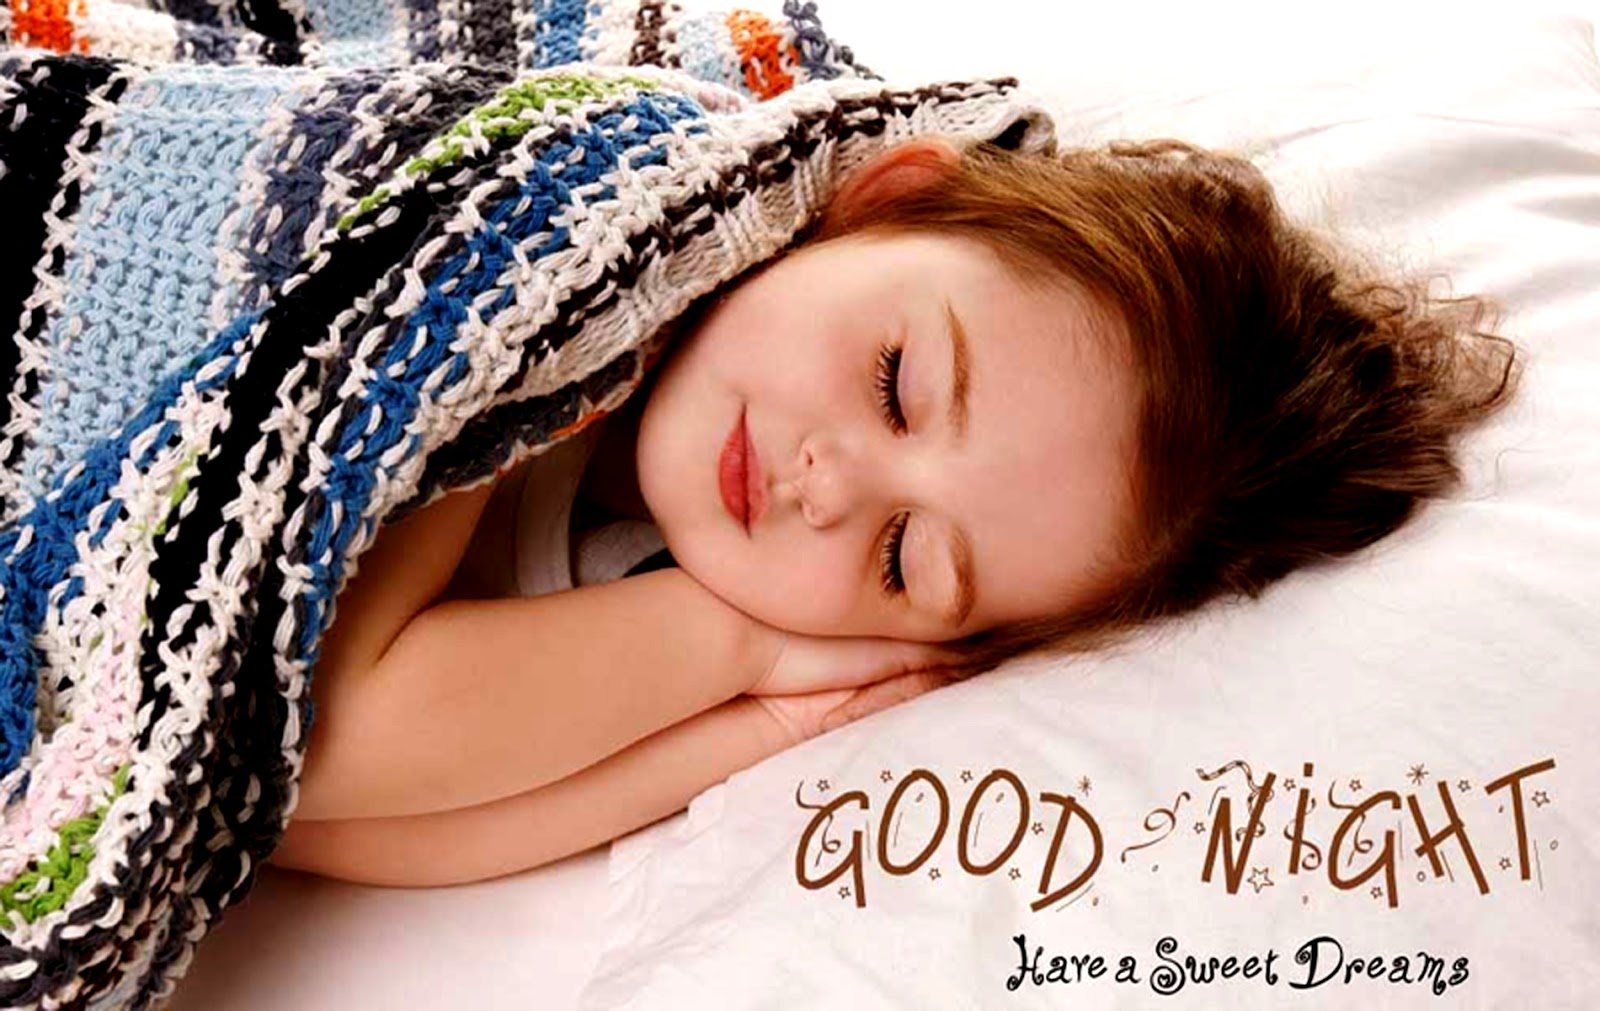 good night have a sweet dreams - inspirational good night quotes